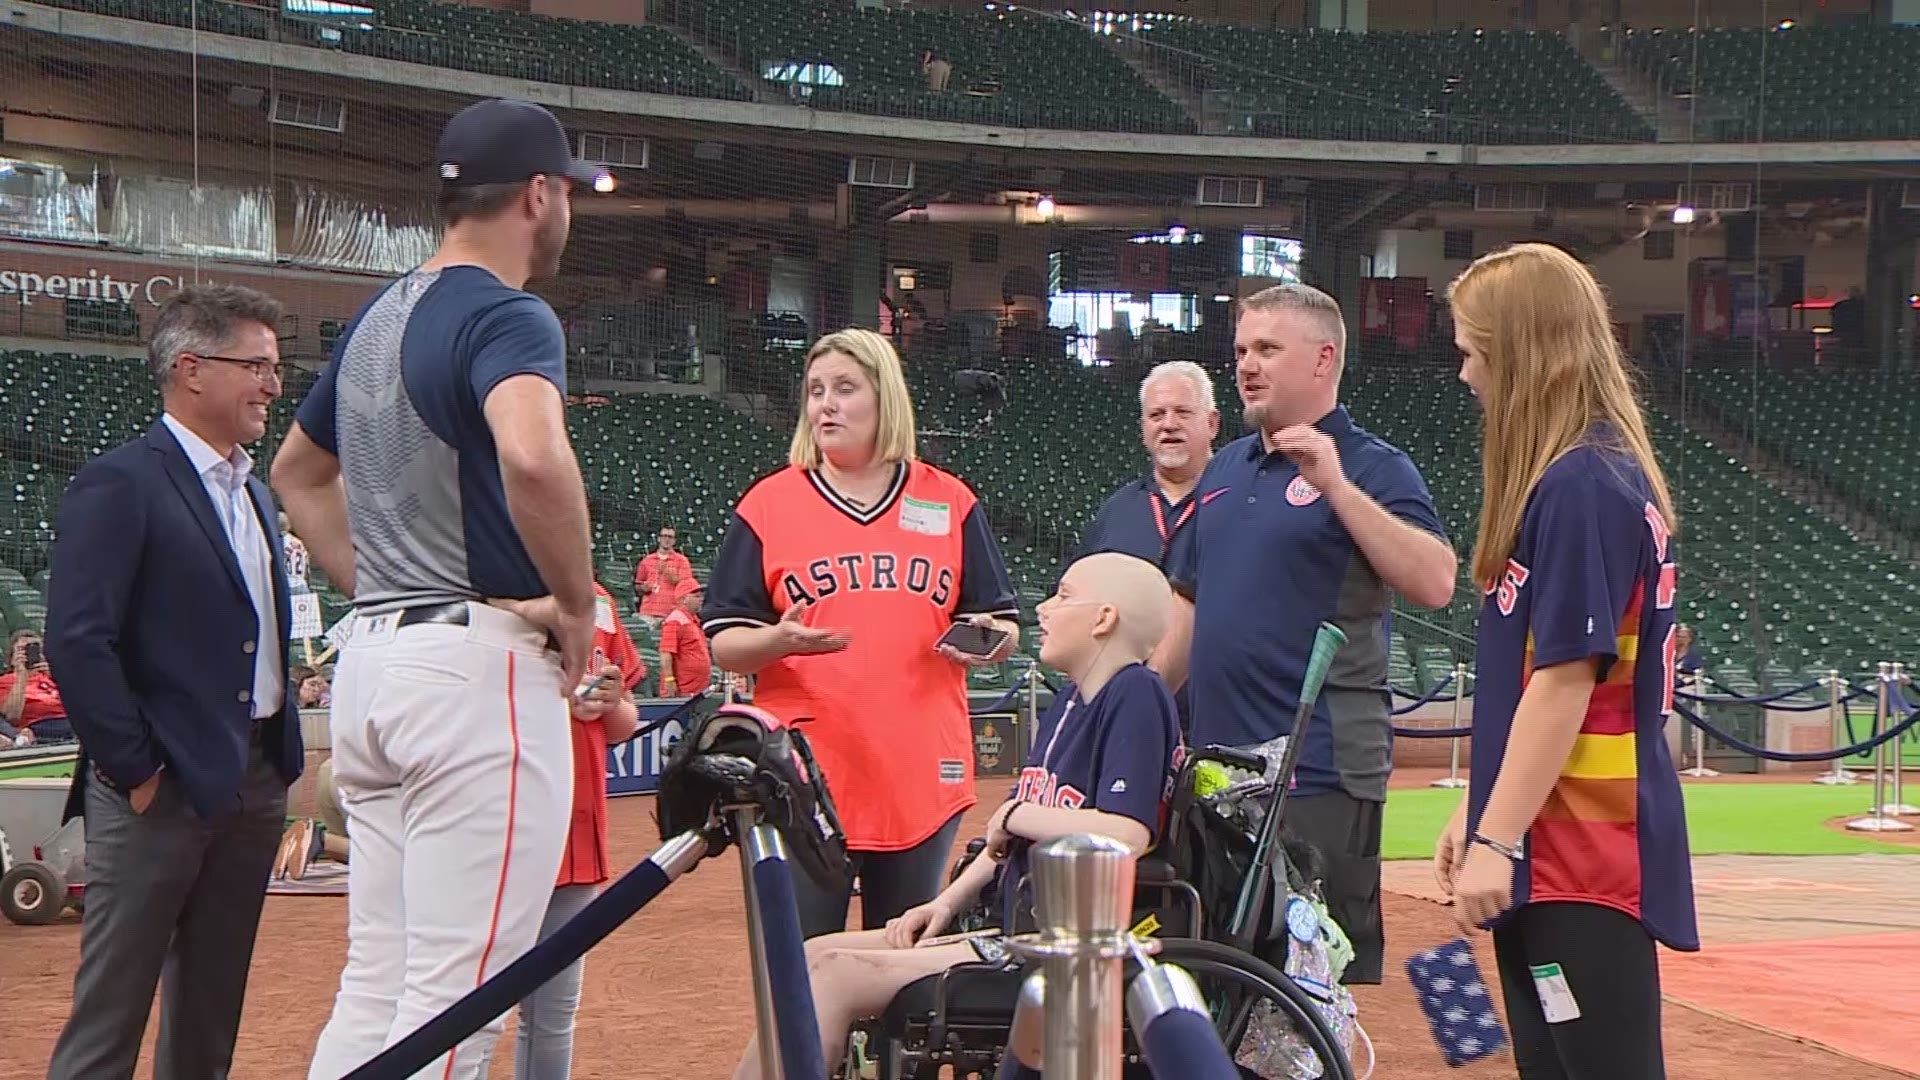 Numerous Astros met with Haidin Land, 15, of Baytown who is living with osteosarcoma. It was a dream come true, according to her family.